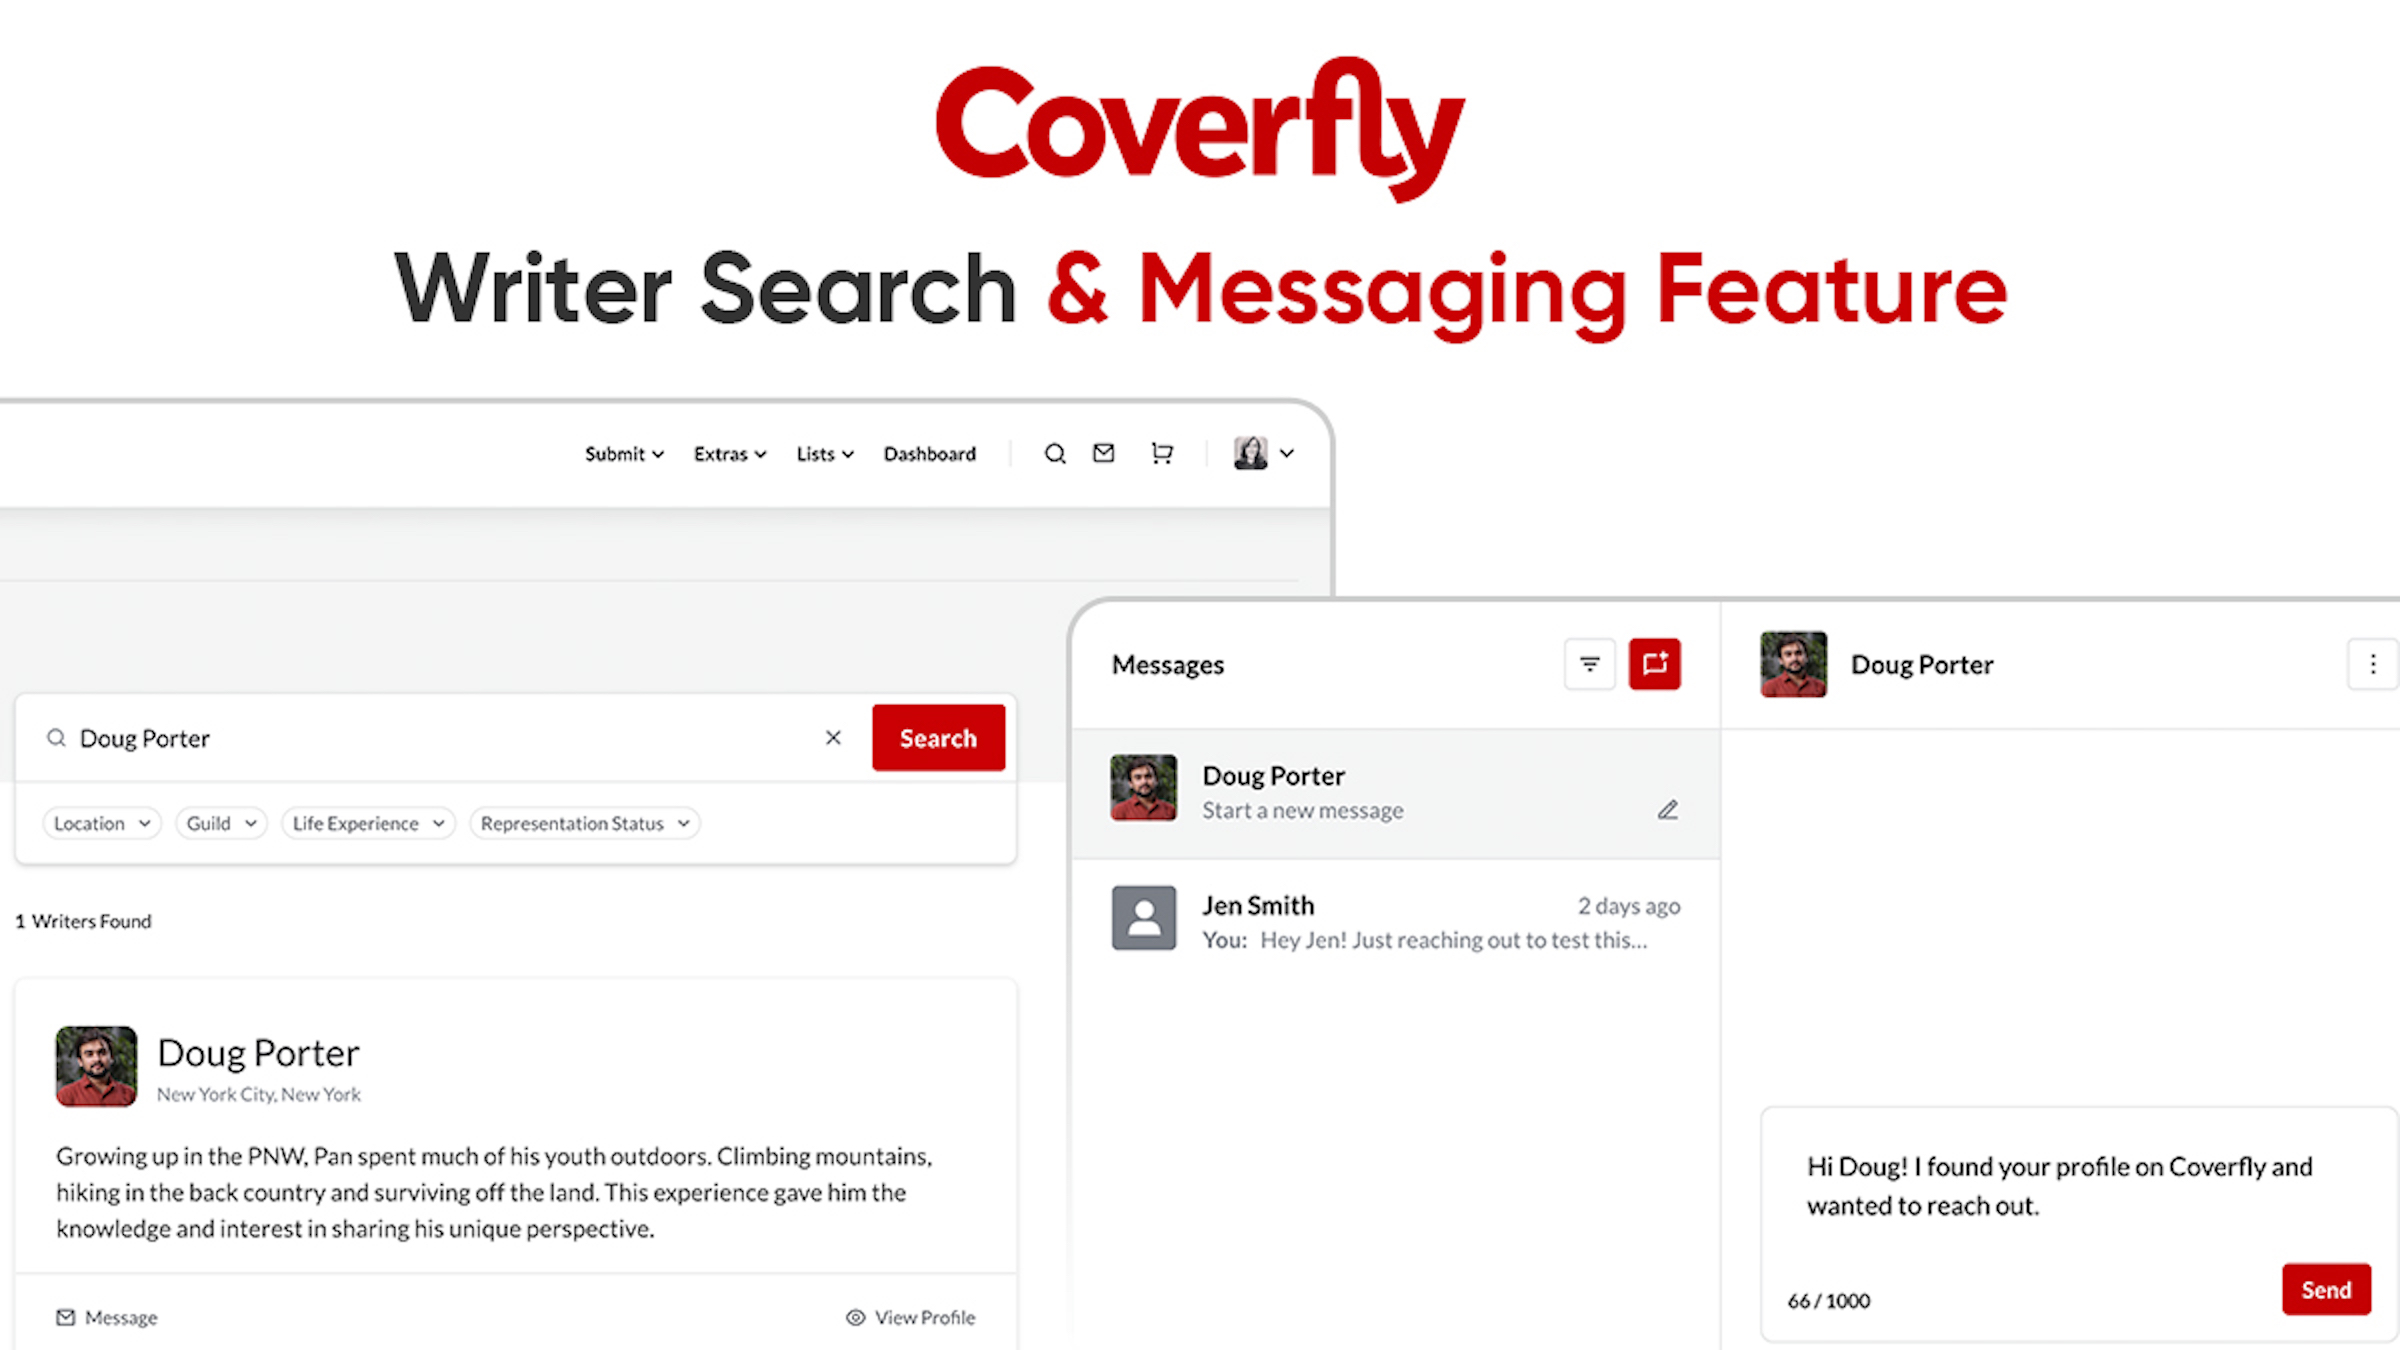 Coverfly’s Writer Search & Messaging Connects Writers in a New Way